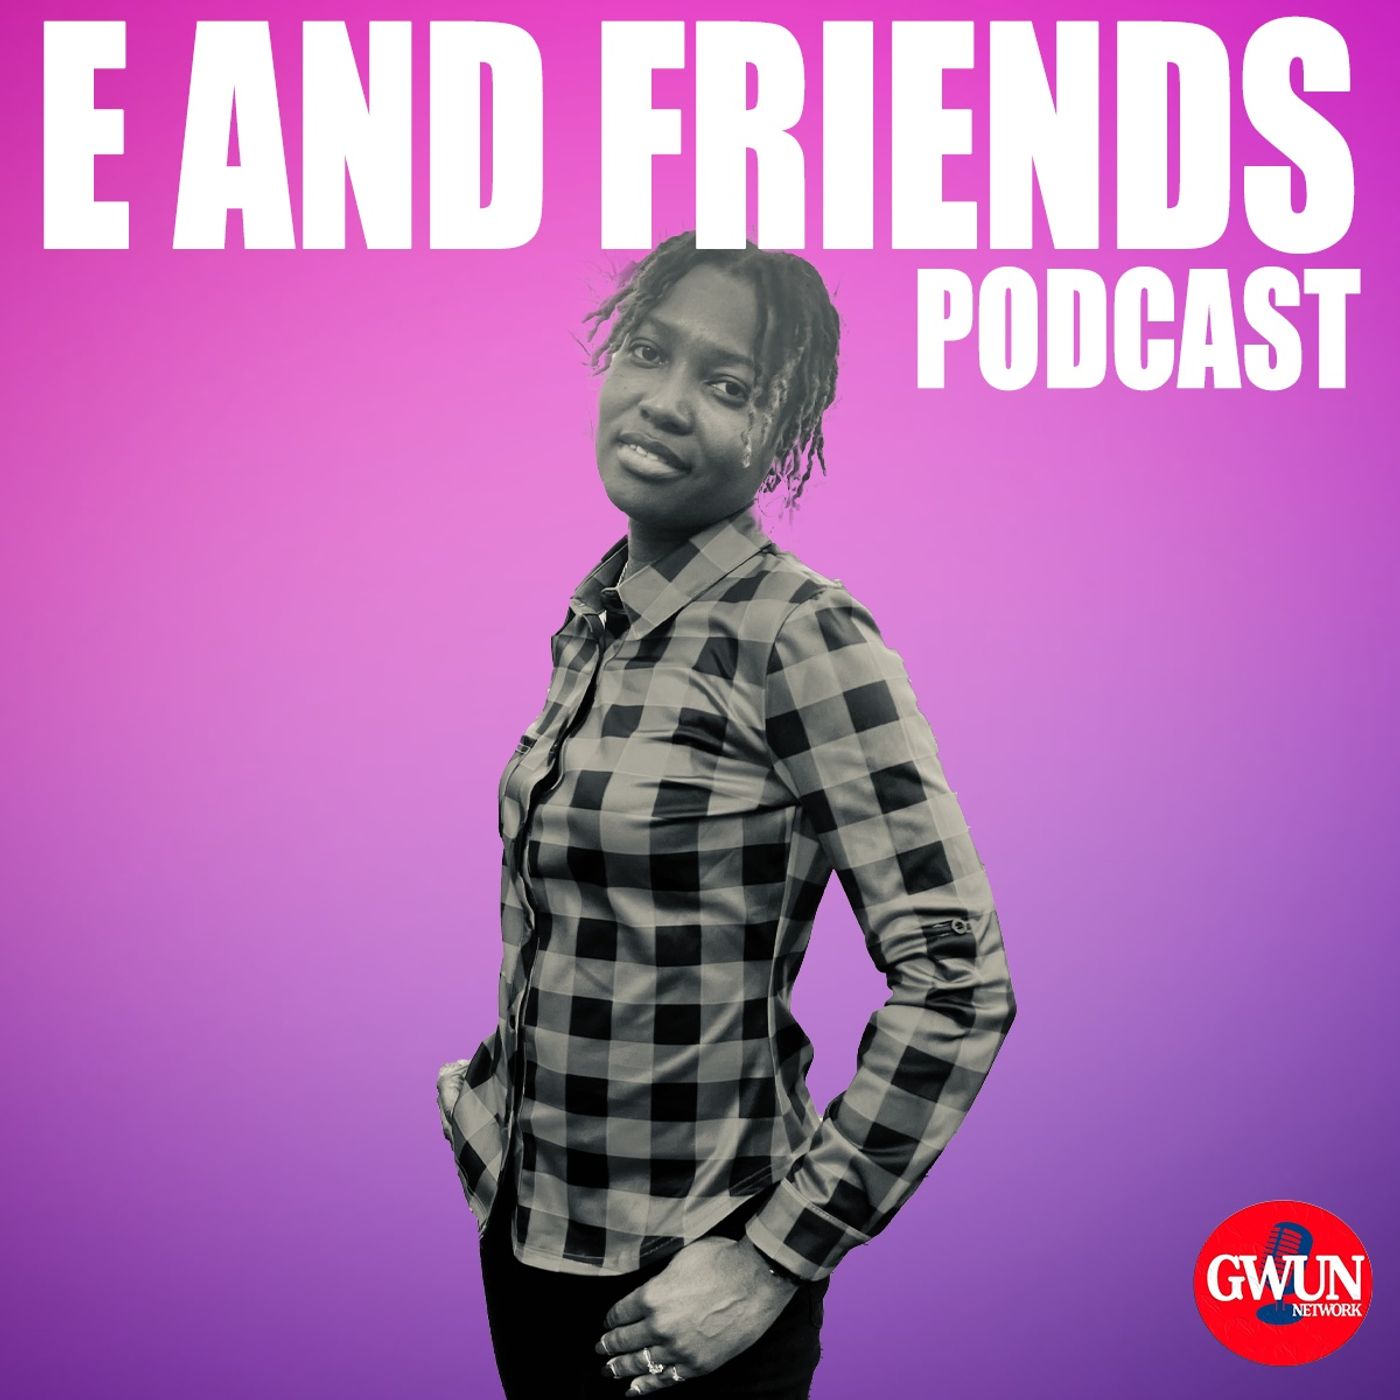 E And Friends Podcast - I Want And Need My Man!